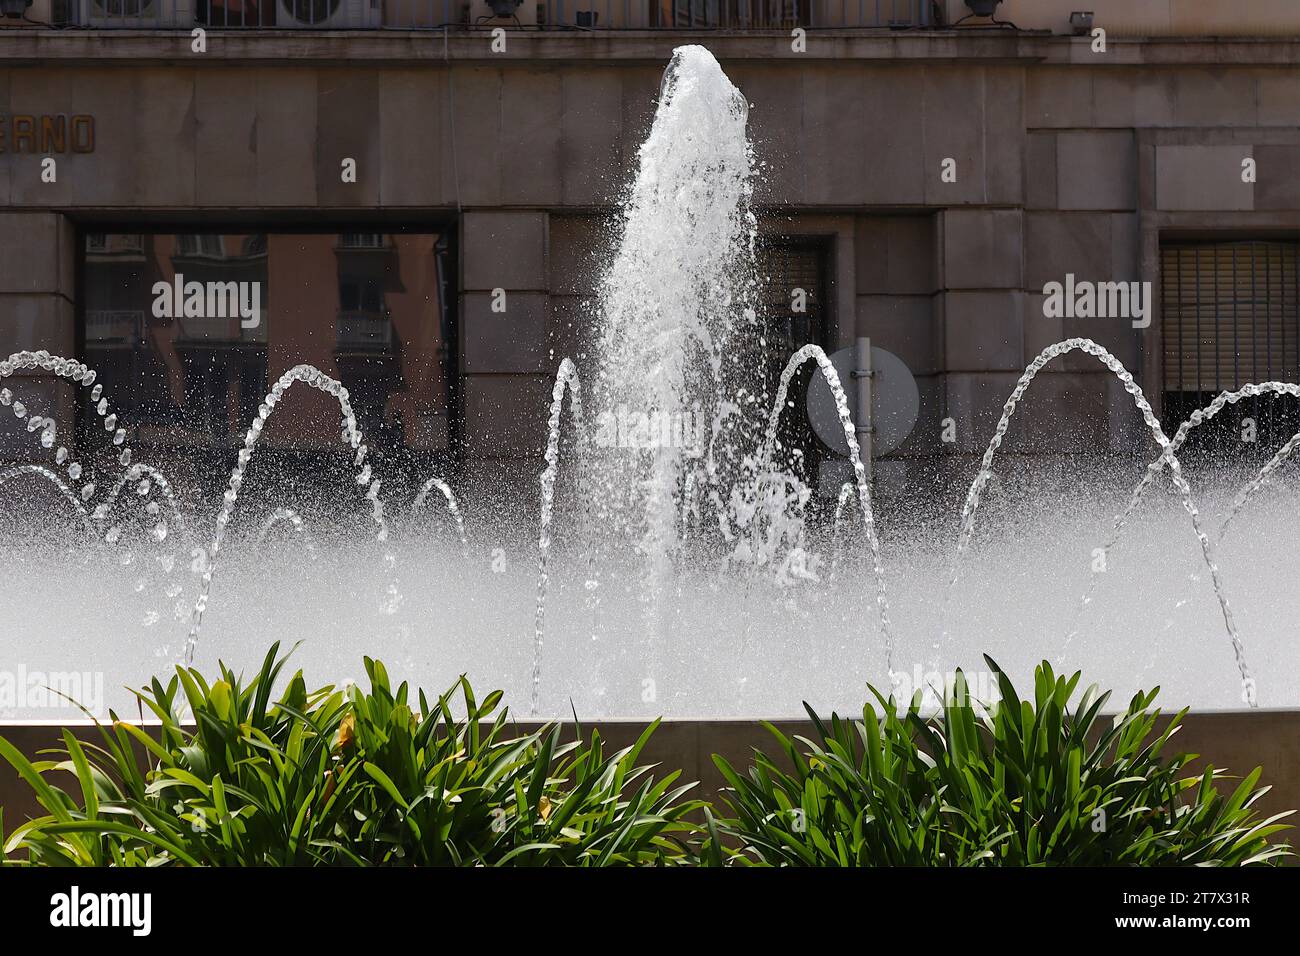 Jets of water frozen by the camera creating the illusion of pearls of crystal glass at a Fountain display in the Plaza De Los Reyes, Ceuta, Spain. Stock Photo